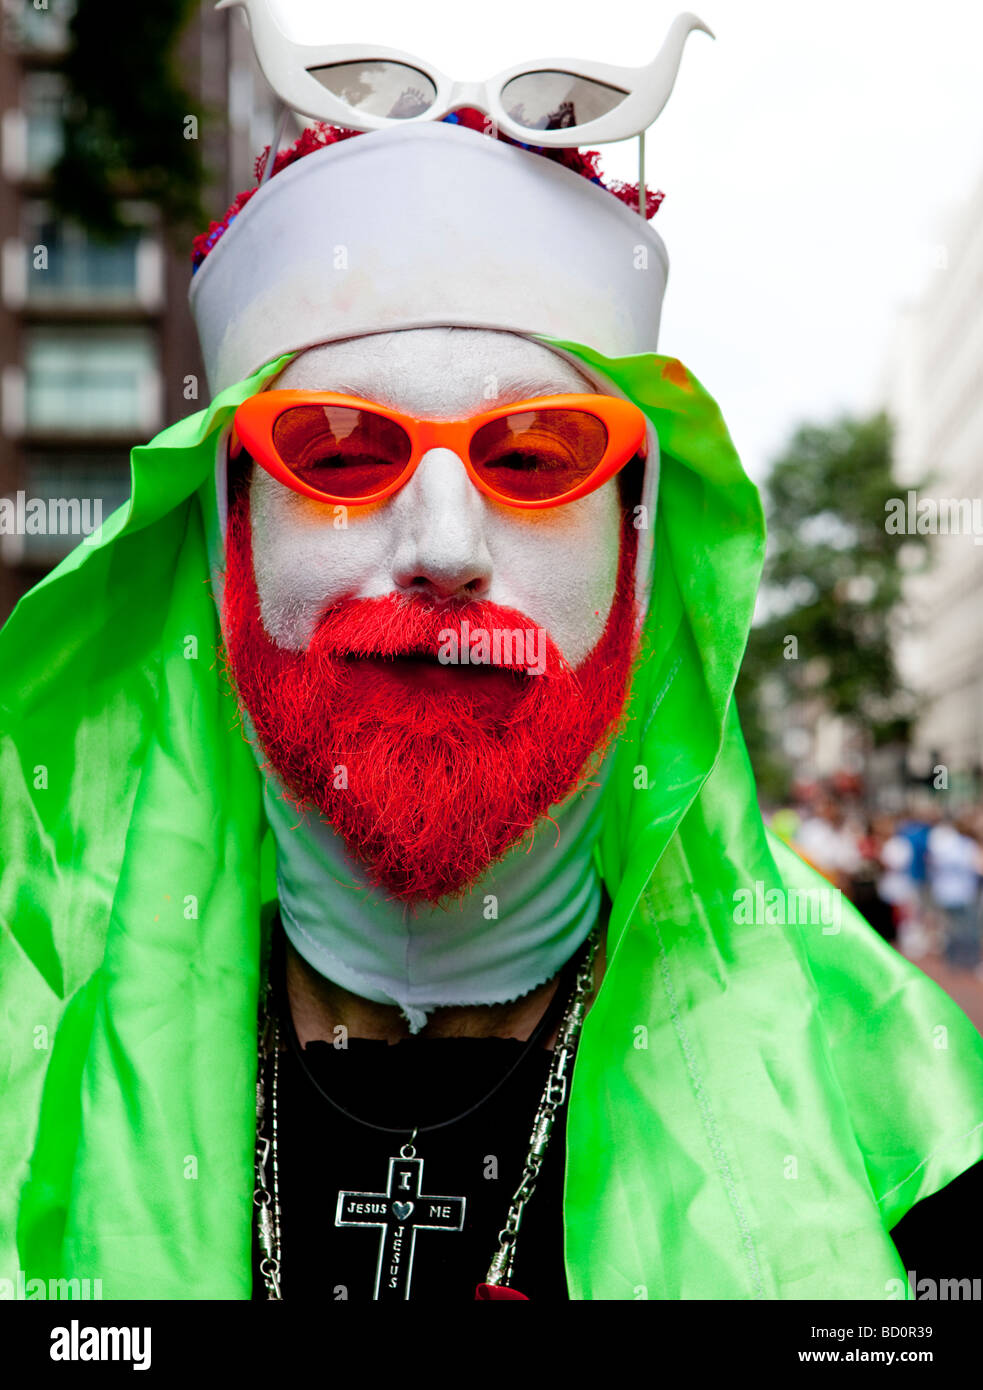 Man Woman With Orange Beard At The Gay pride March In London UK Stock Photo